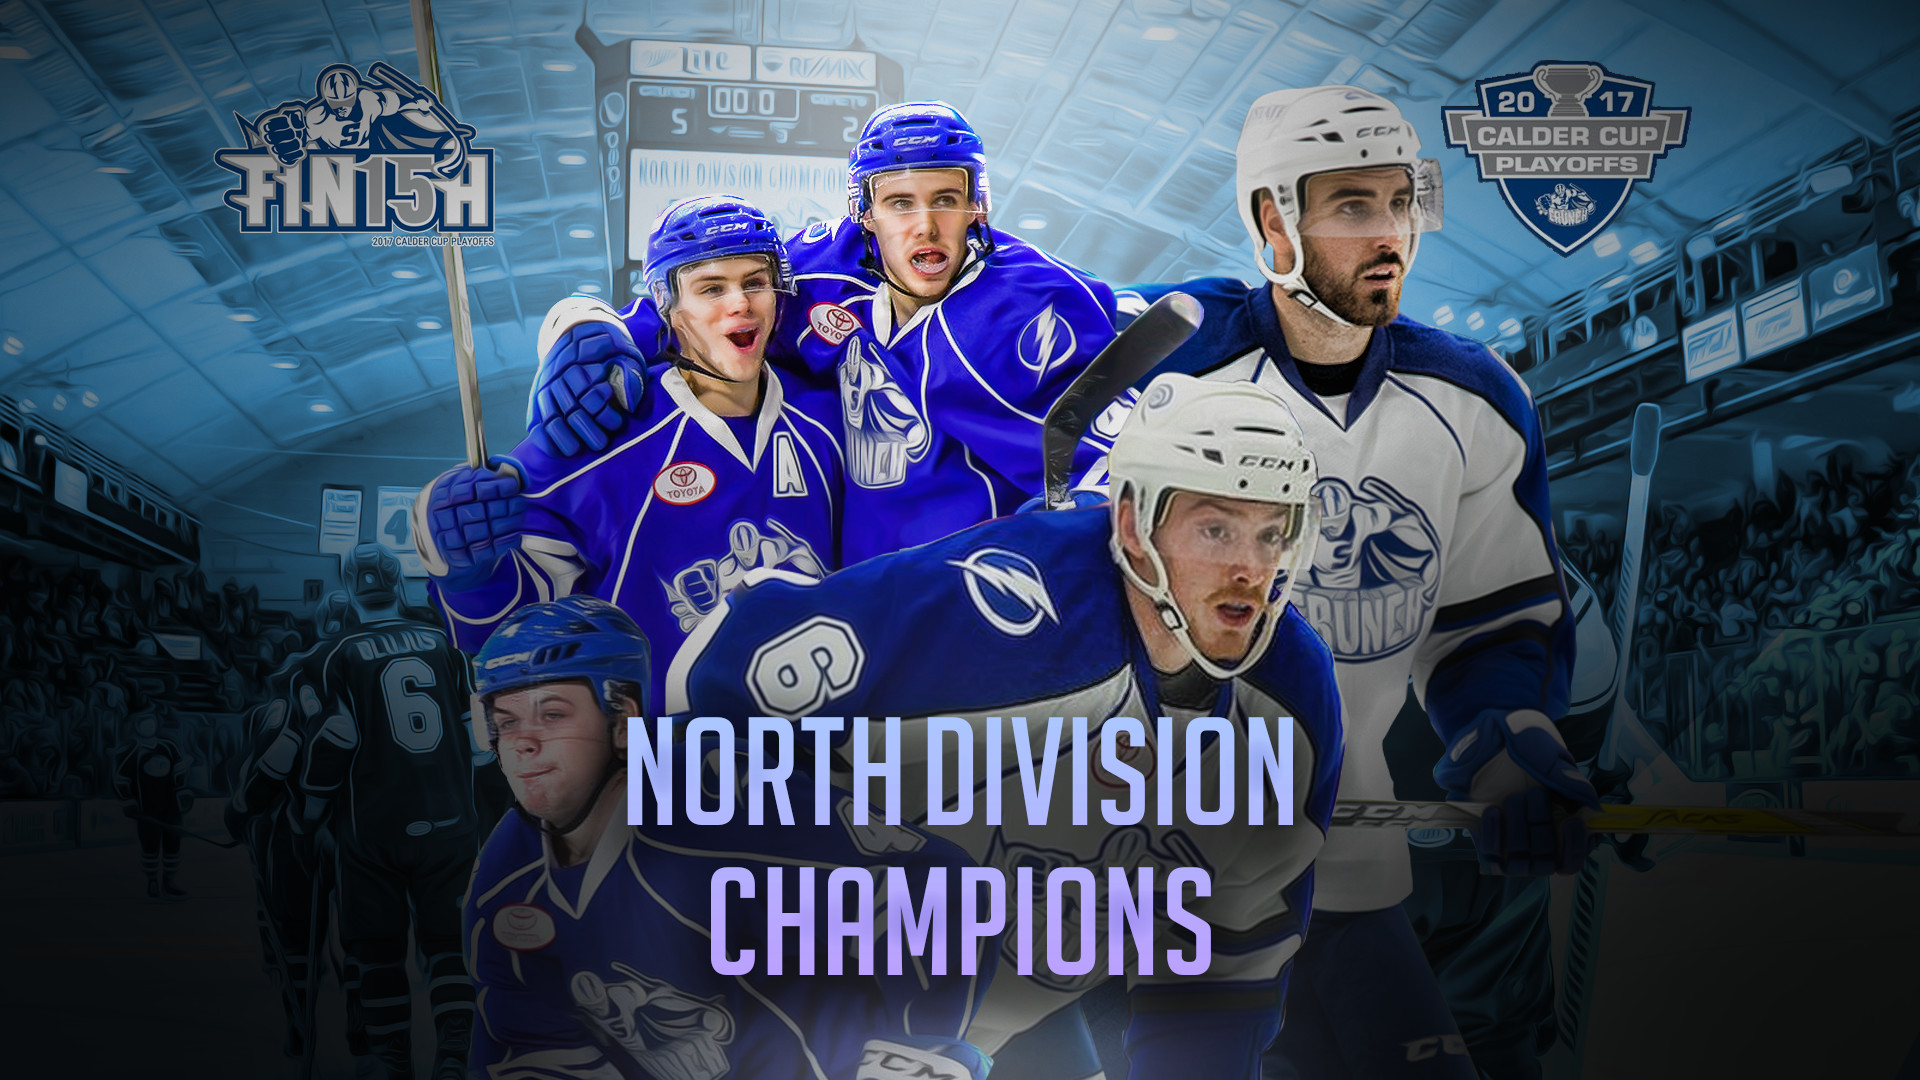 1920x1080 The 2016-17 season was one like no other, but now it's time for the North  Division champions to look forward towards another, bigger goal.